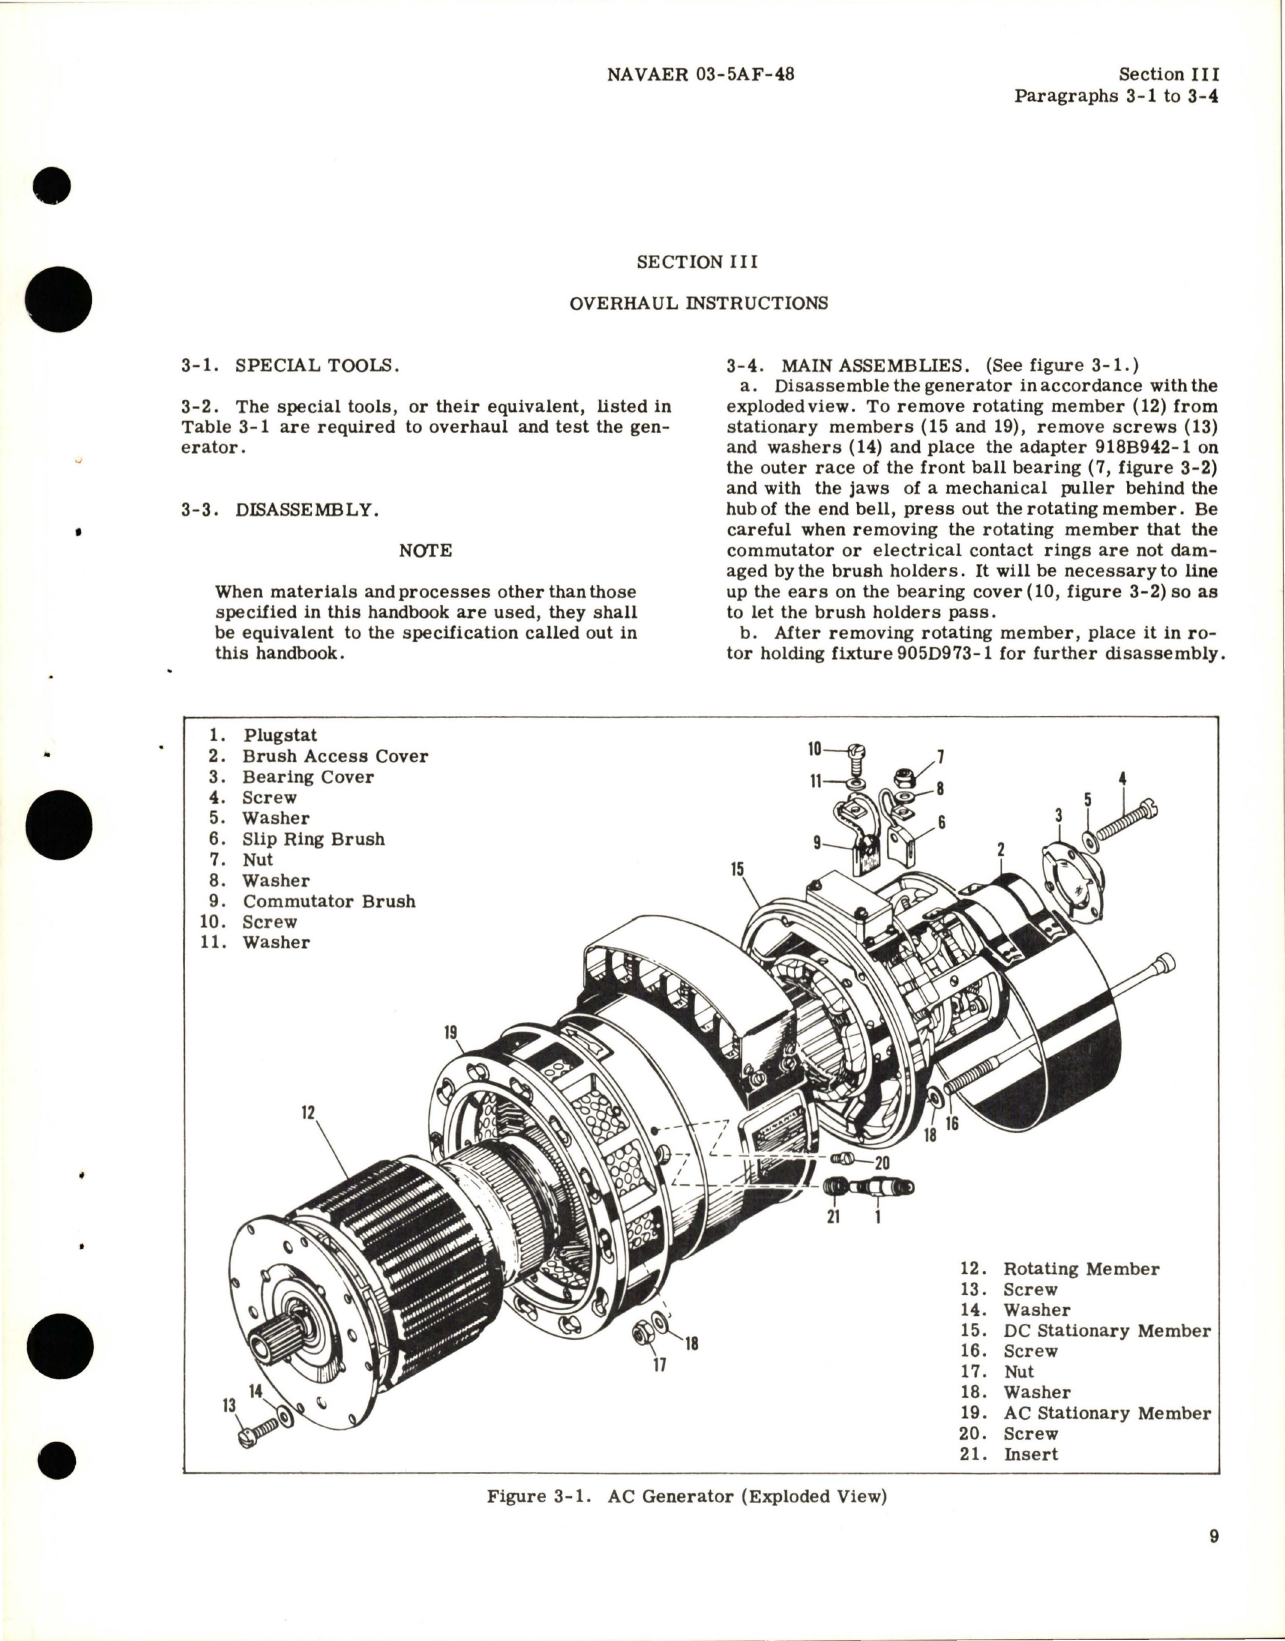 Sample page 9 from AirCorps Library document: Operation, Service and Overhaul Instructions for AC Generator - Parts 903J820-1 and A50J207-2 